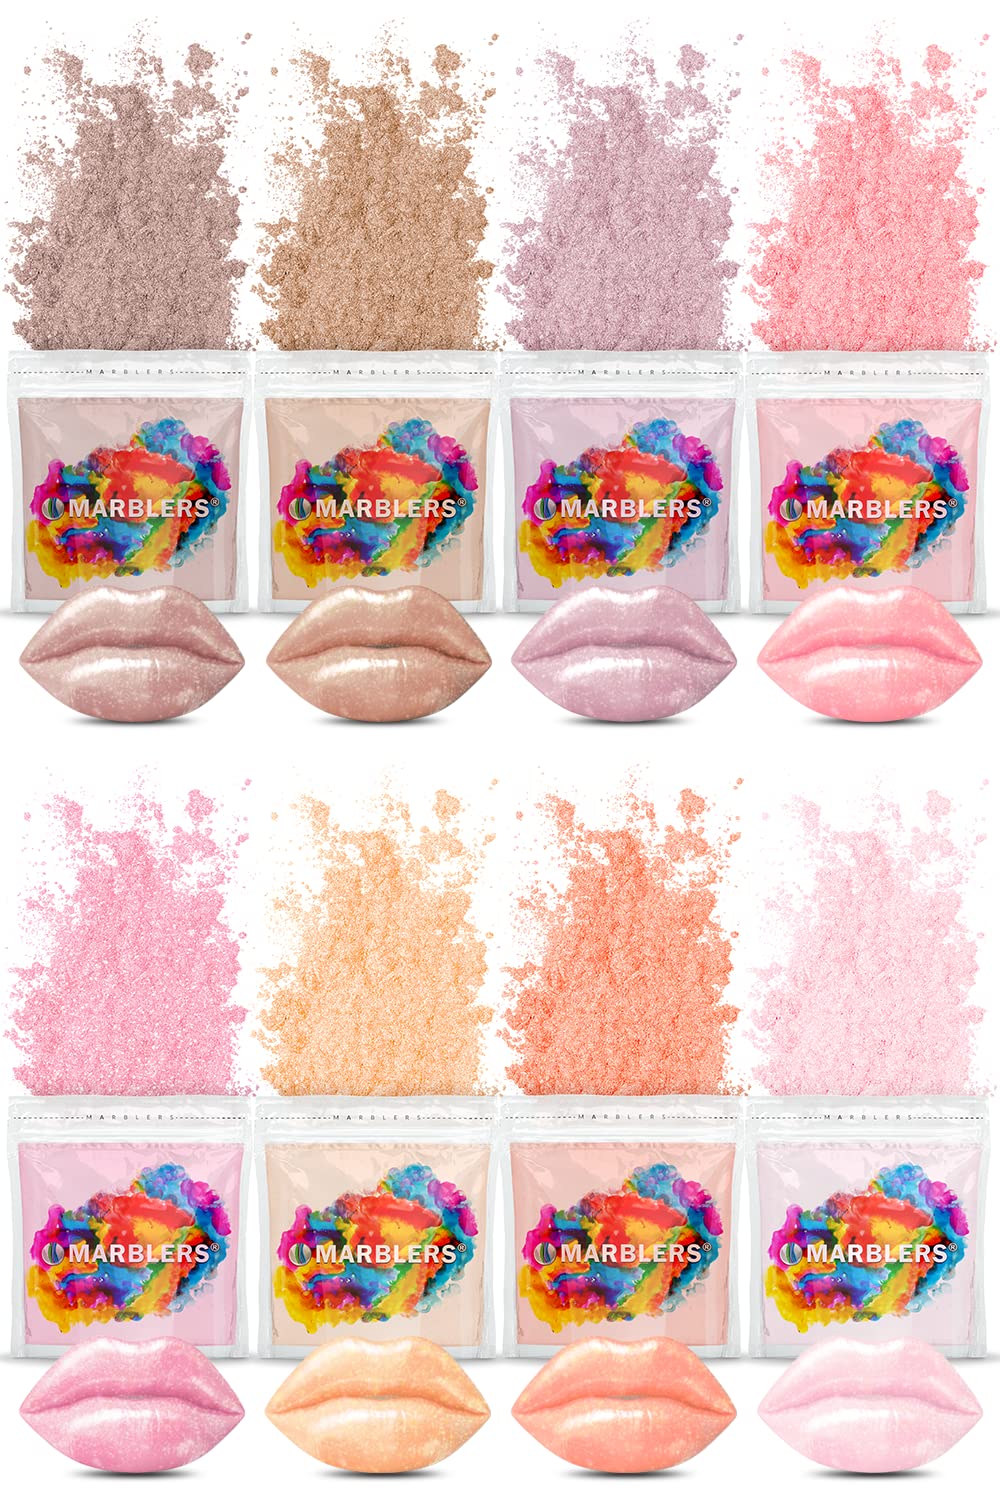 MARBLERS Cosmetic Grade Mica Powder [40 Color Set] | Pearlescent Pigment | Dye | Non-Toxic | Vegan | Cruelty-Free | Festival, Rave & Party Makeup 